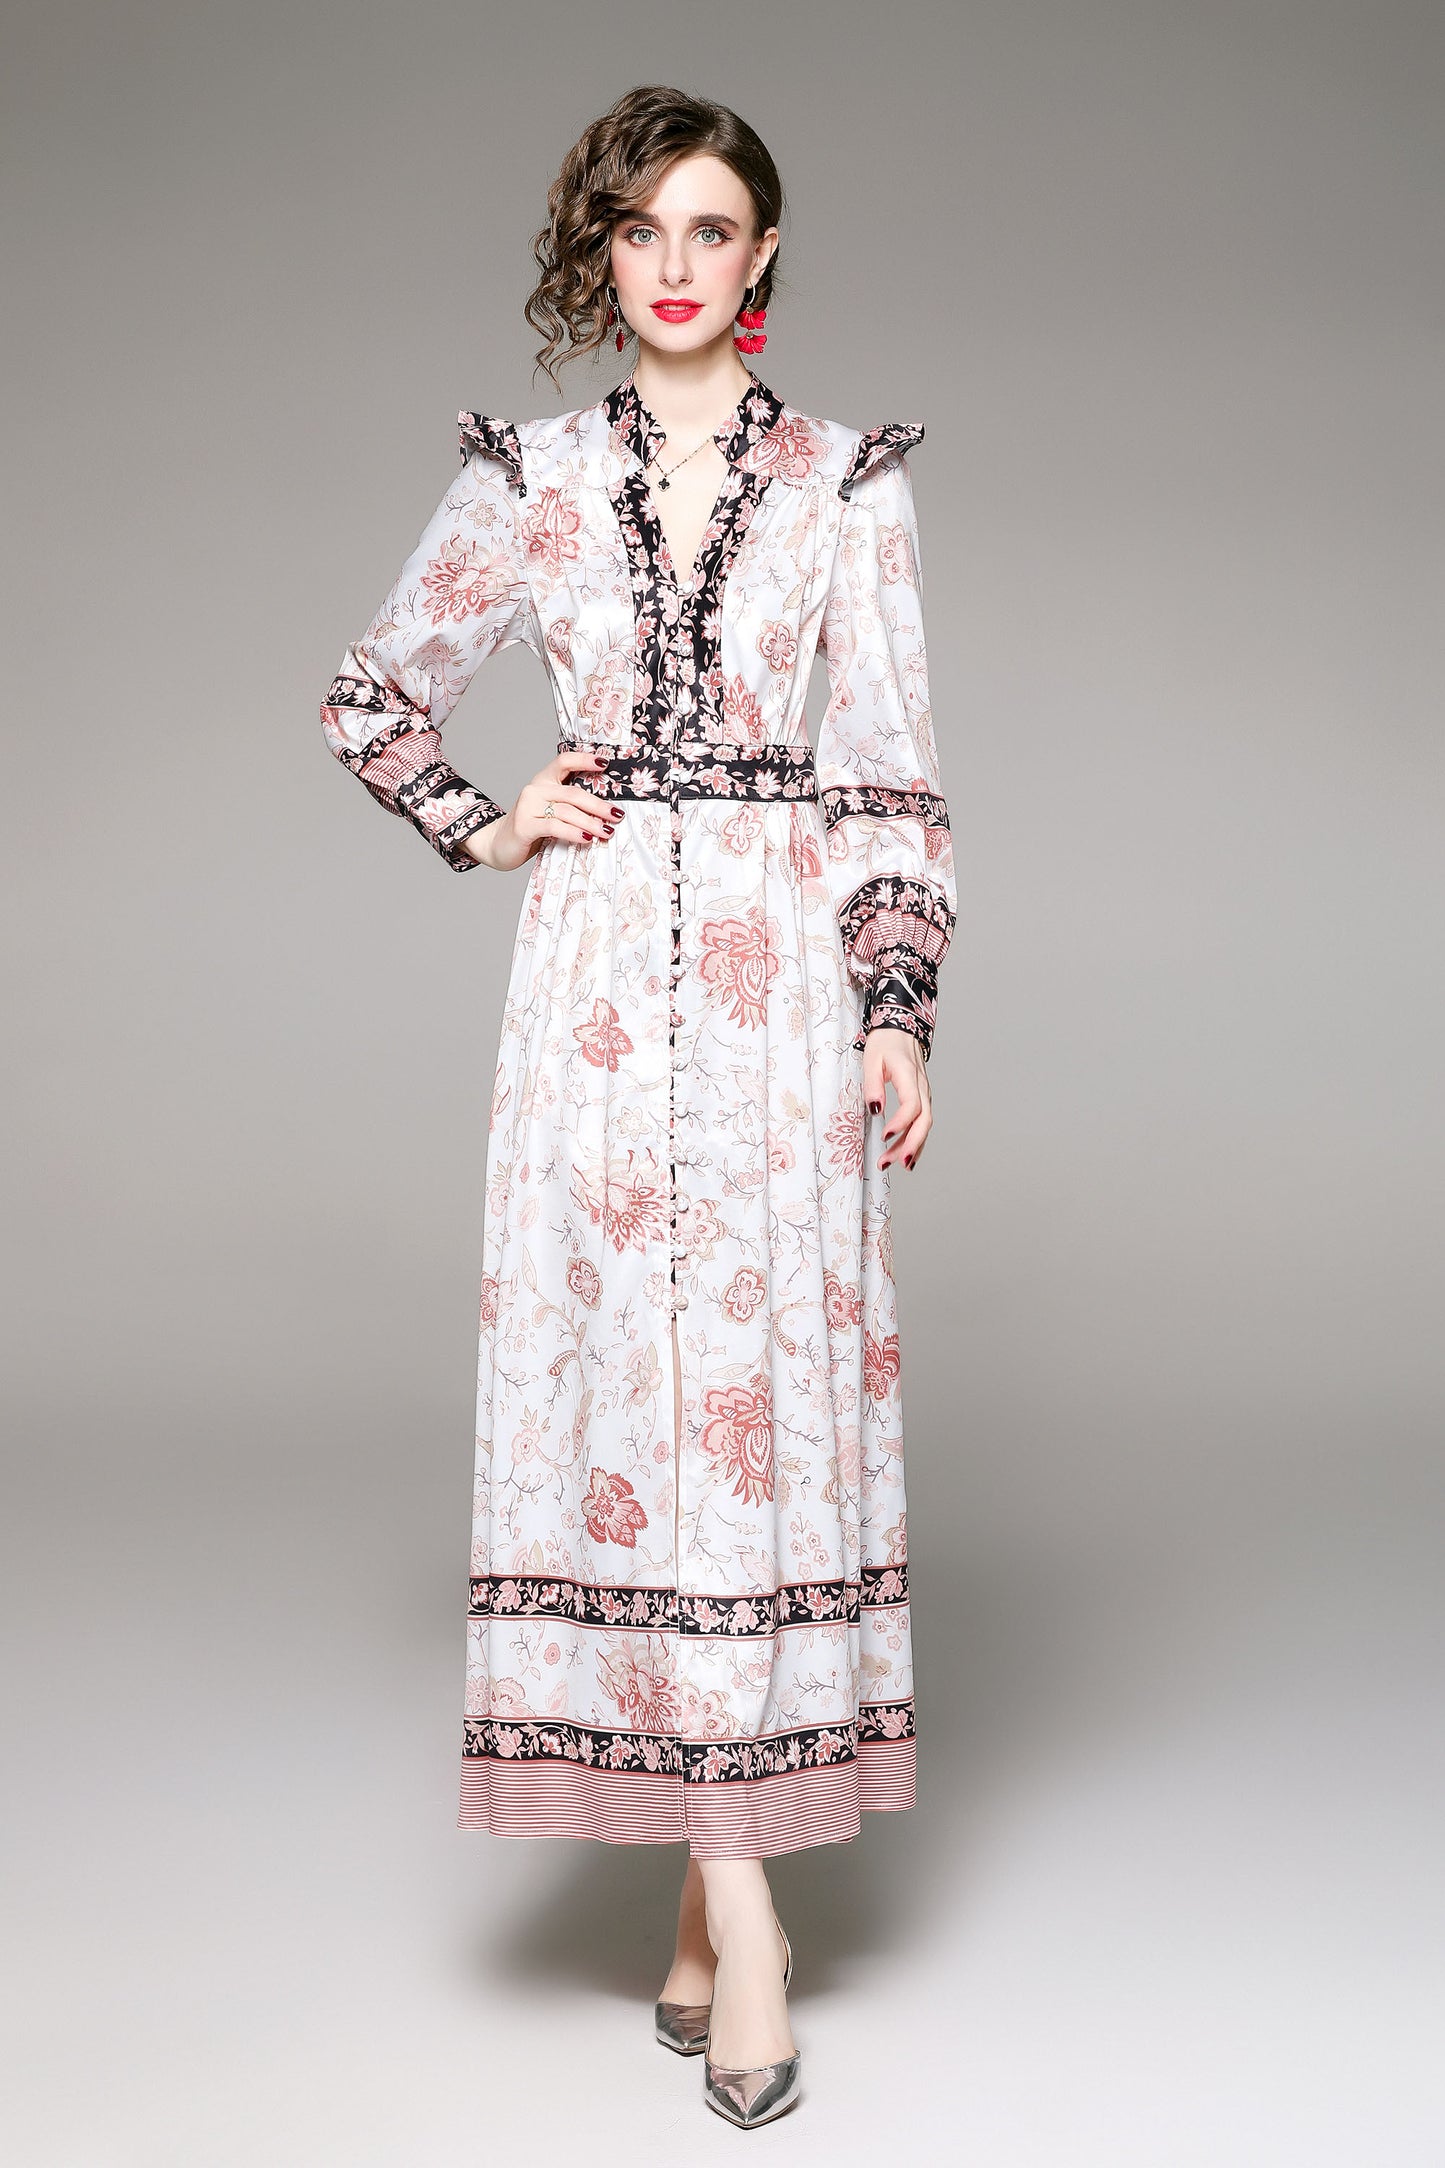 White Floral Print Maxi Dress Flowy Casual Button Up Long Dress